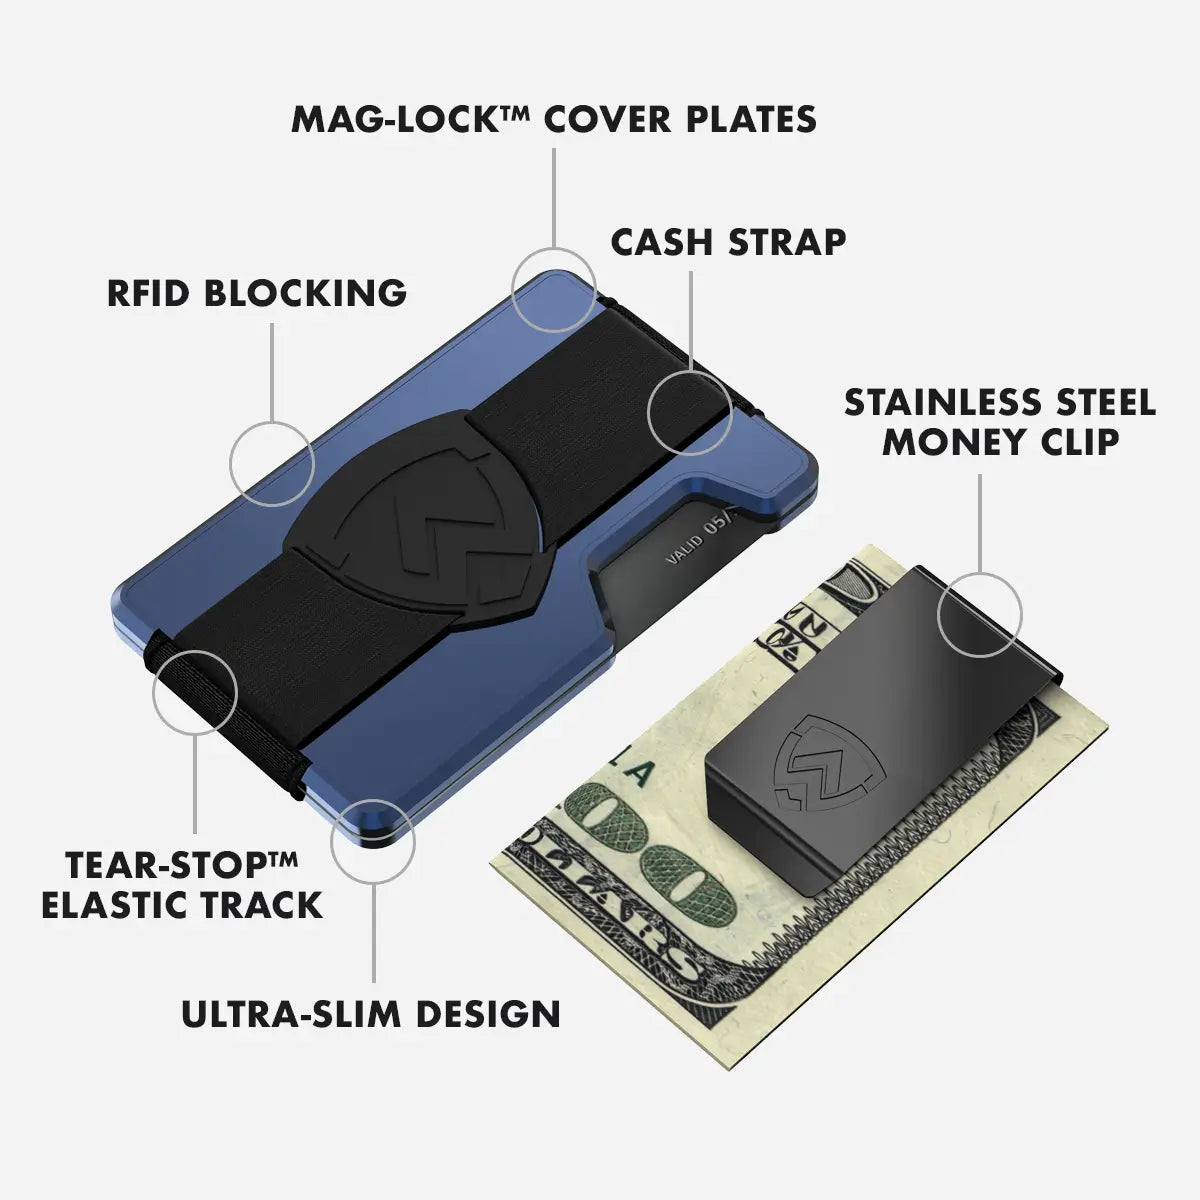 Wallet with Key Holder - Navy Blue